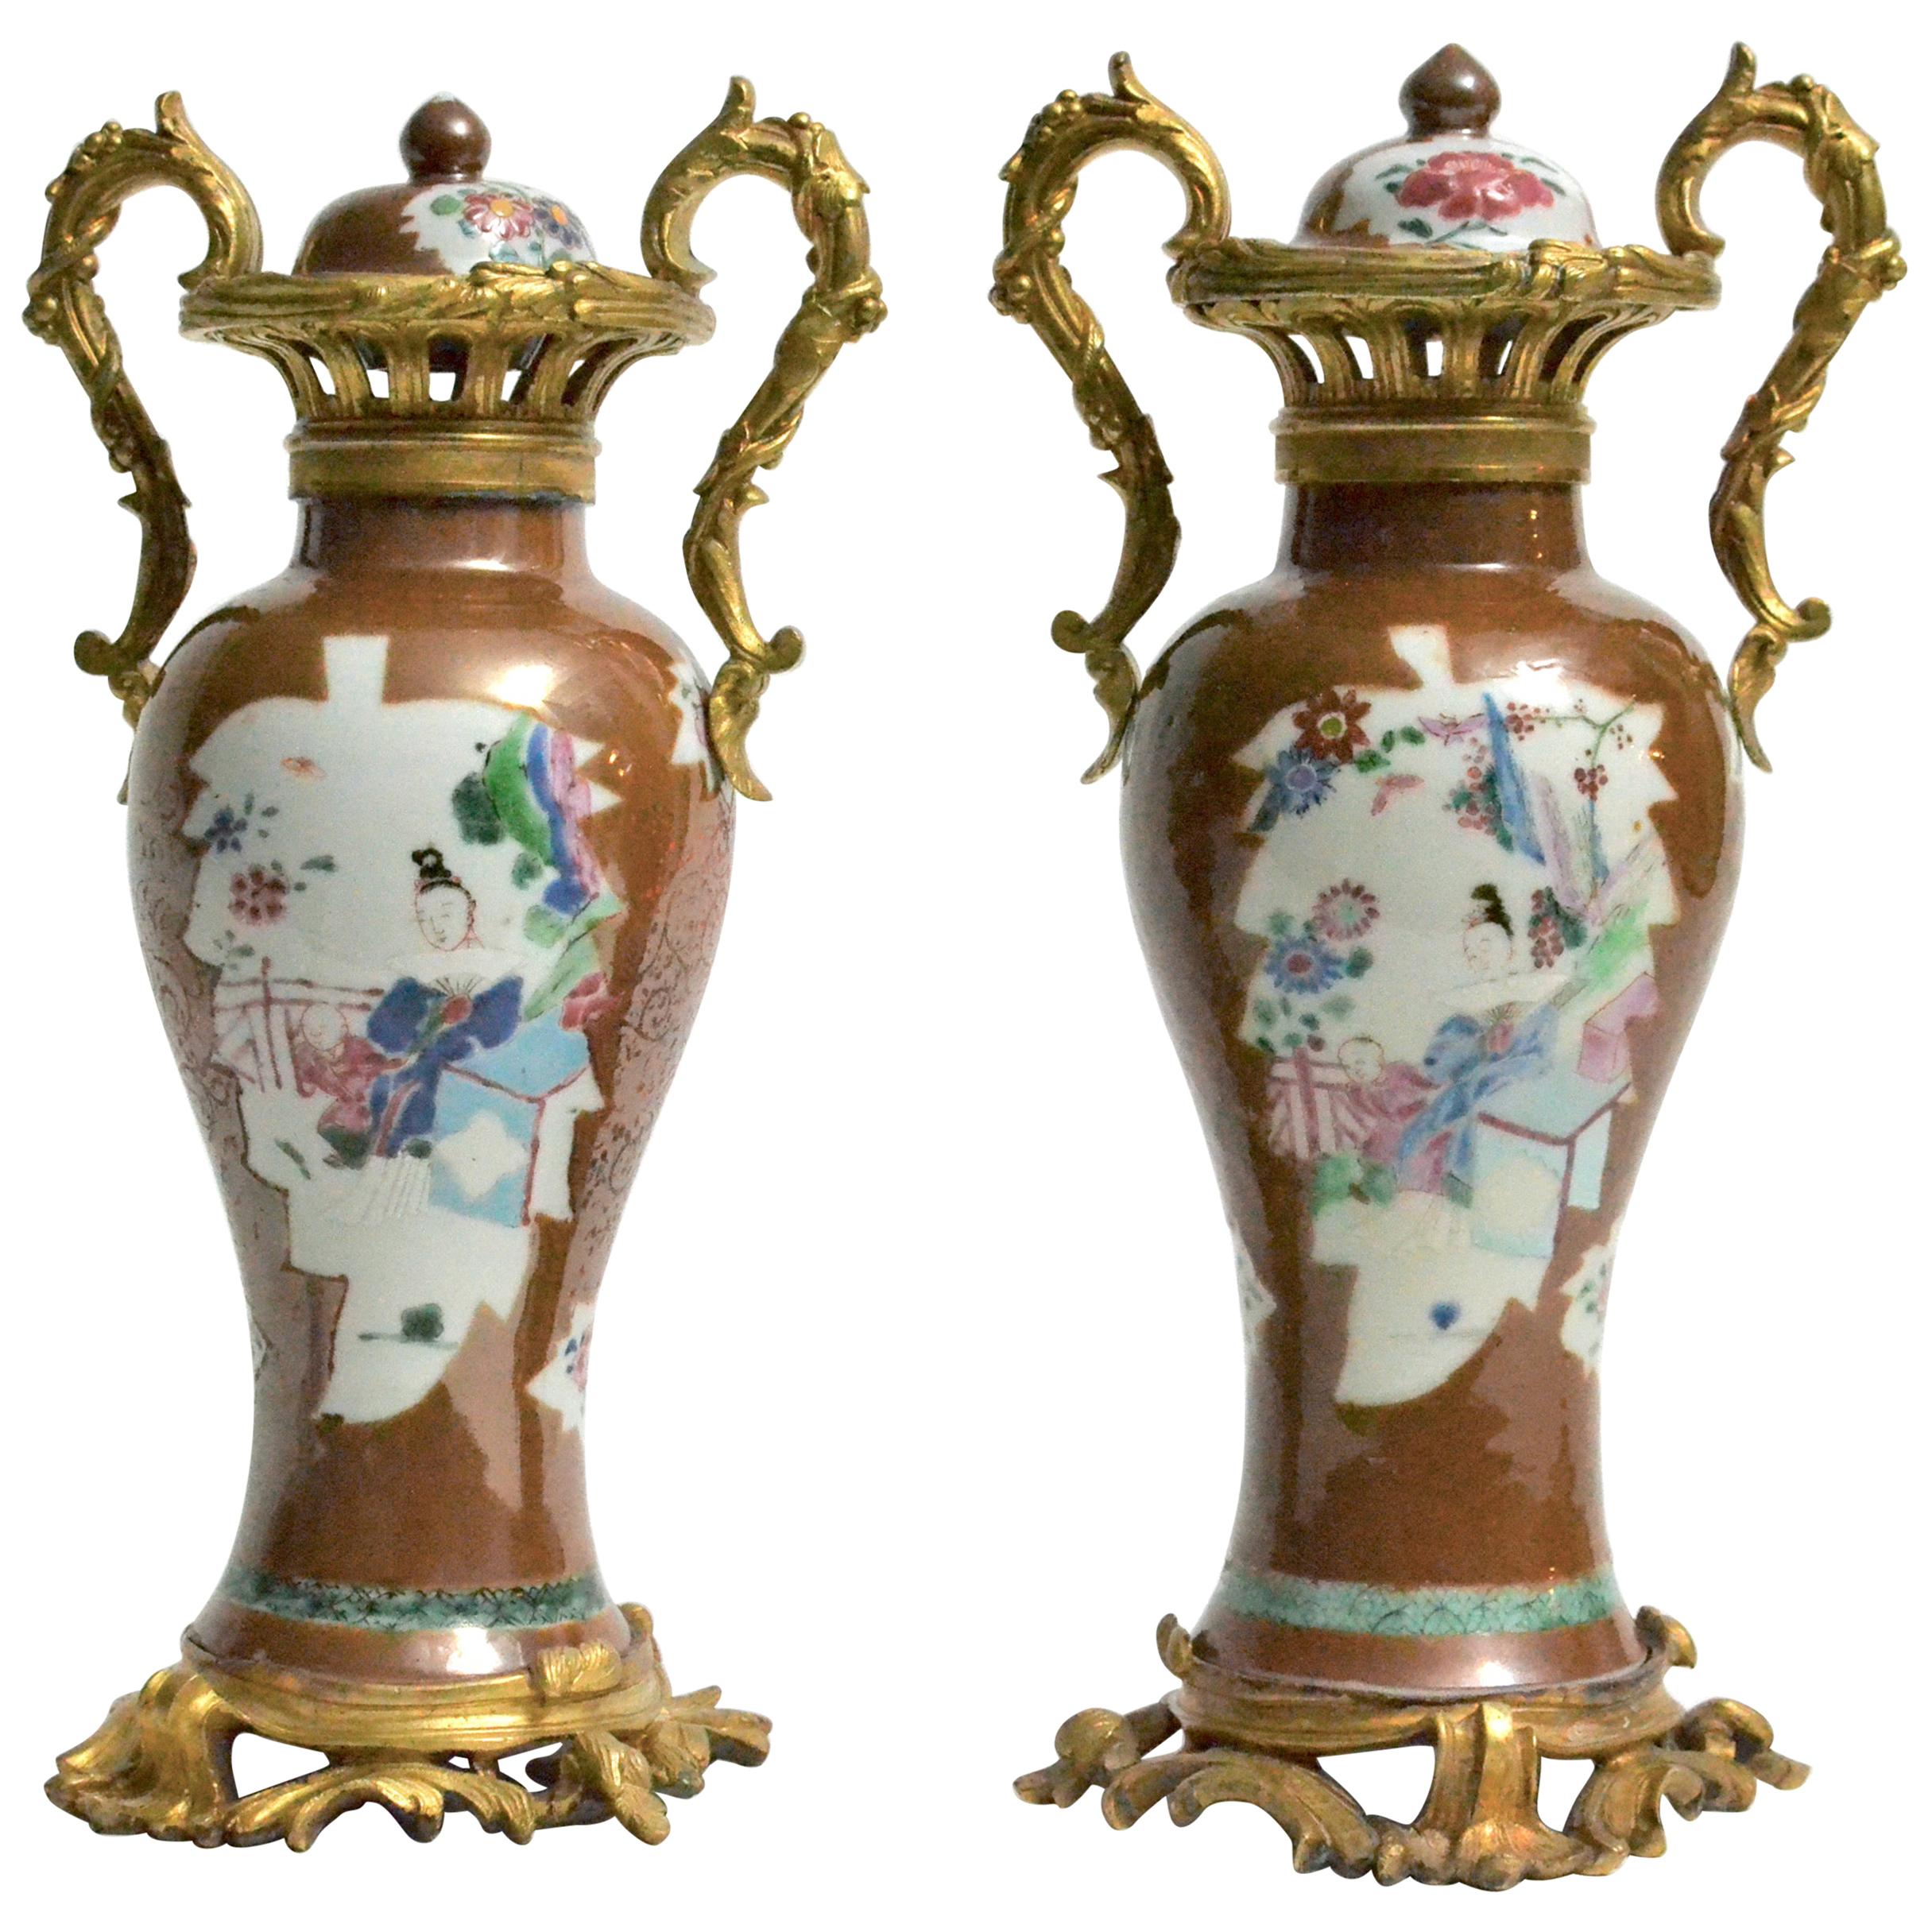 Pair of Chinese Ormolu Mounted Porcelain Vases, 18th Century